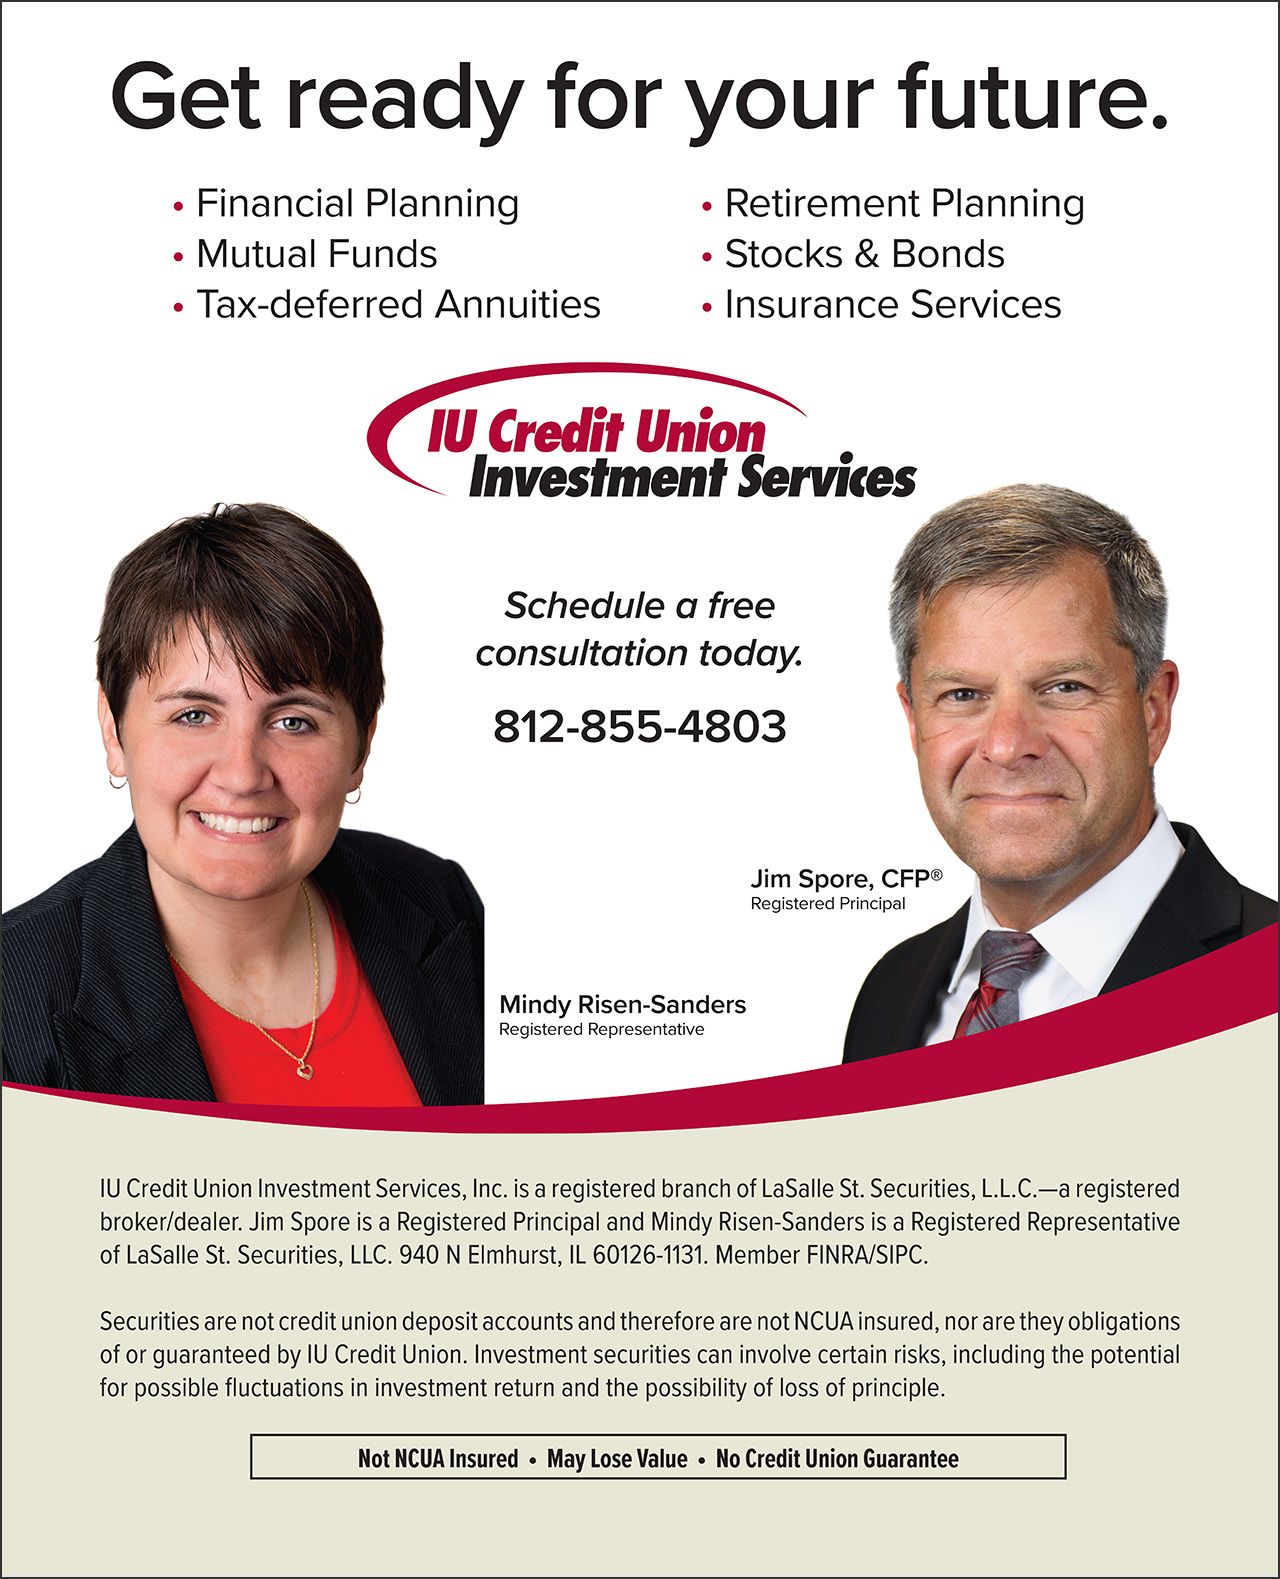 IU Credit Union Investment Services Advertisement